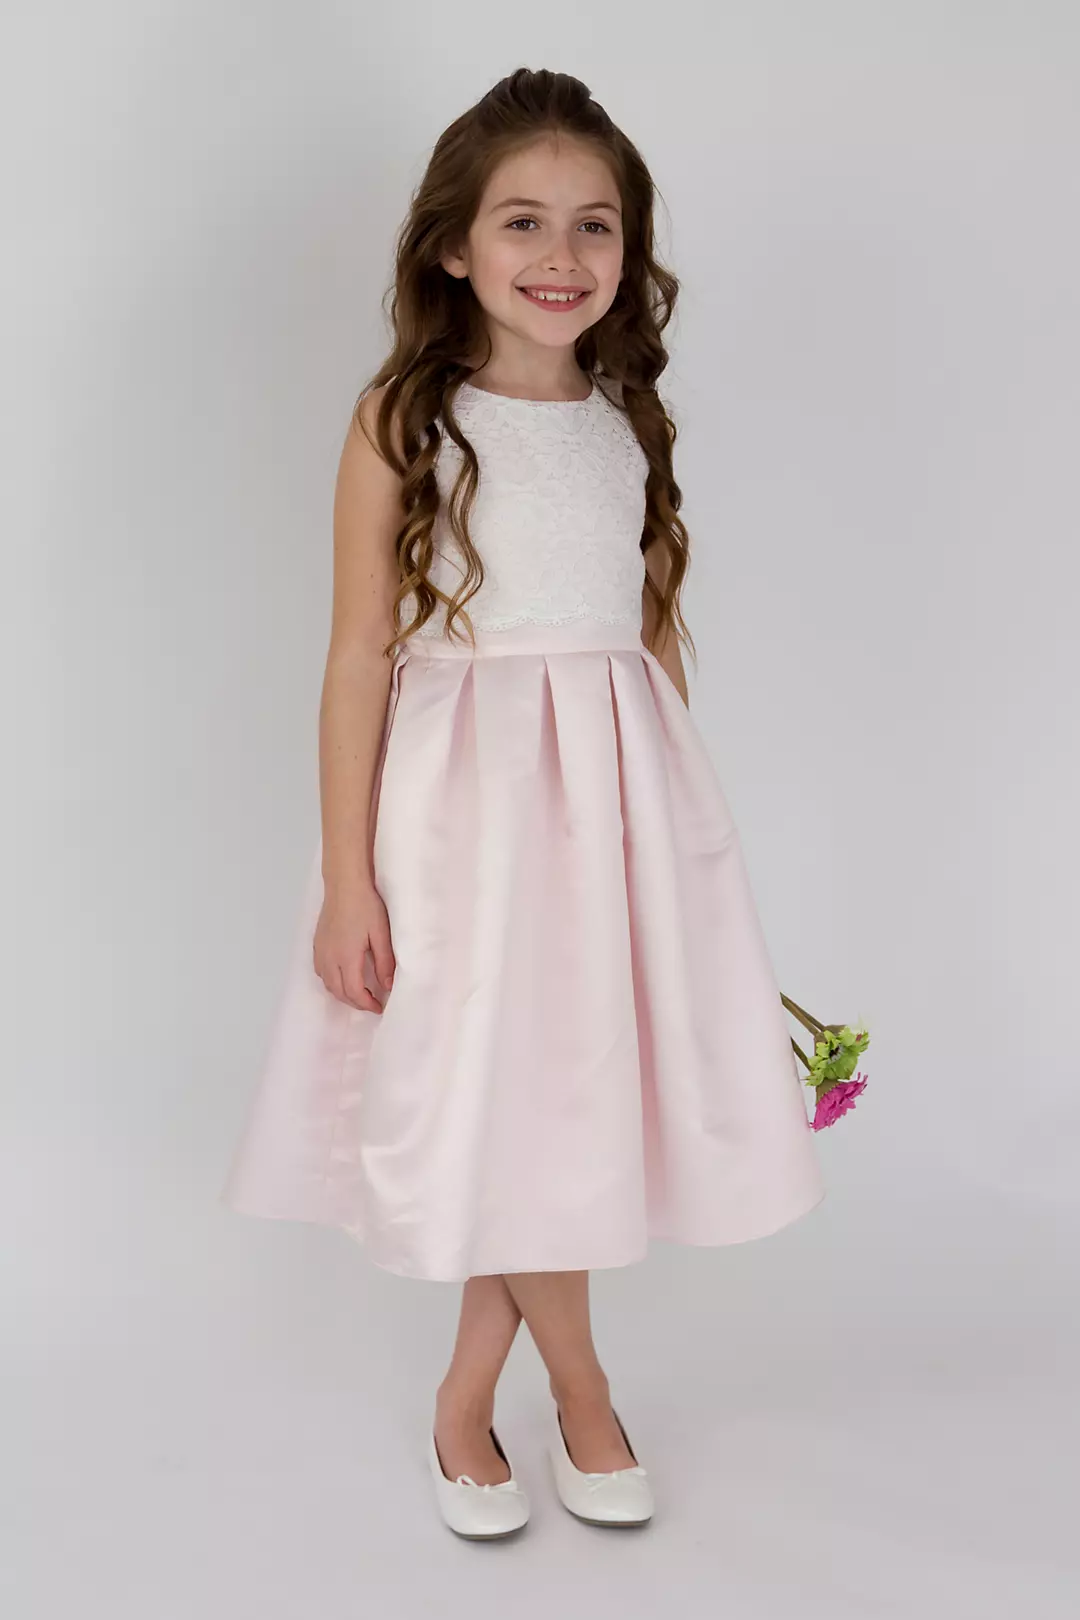 Scalloped Lace and Satin Flower Girl Dress Image